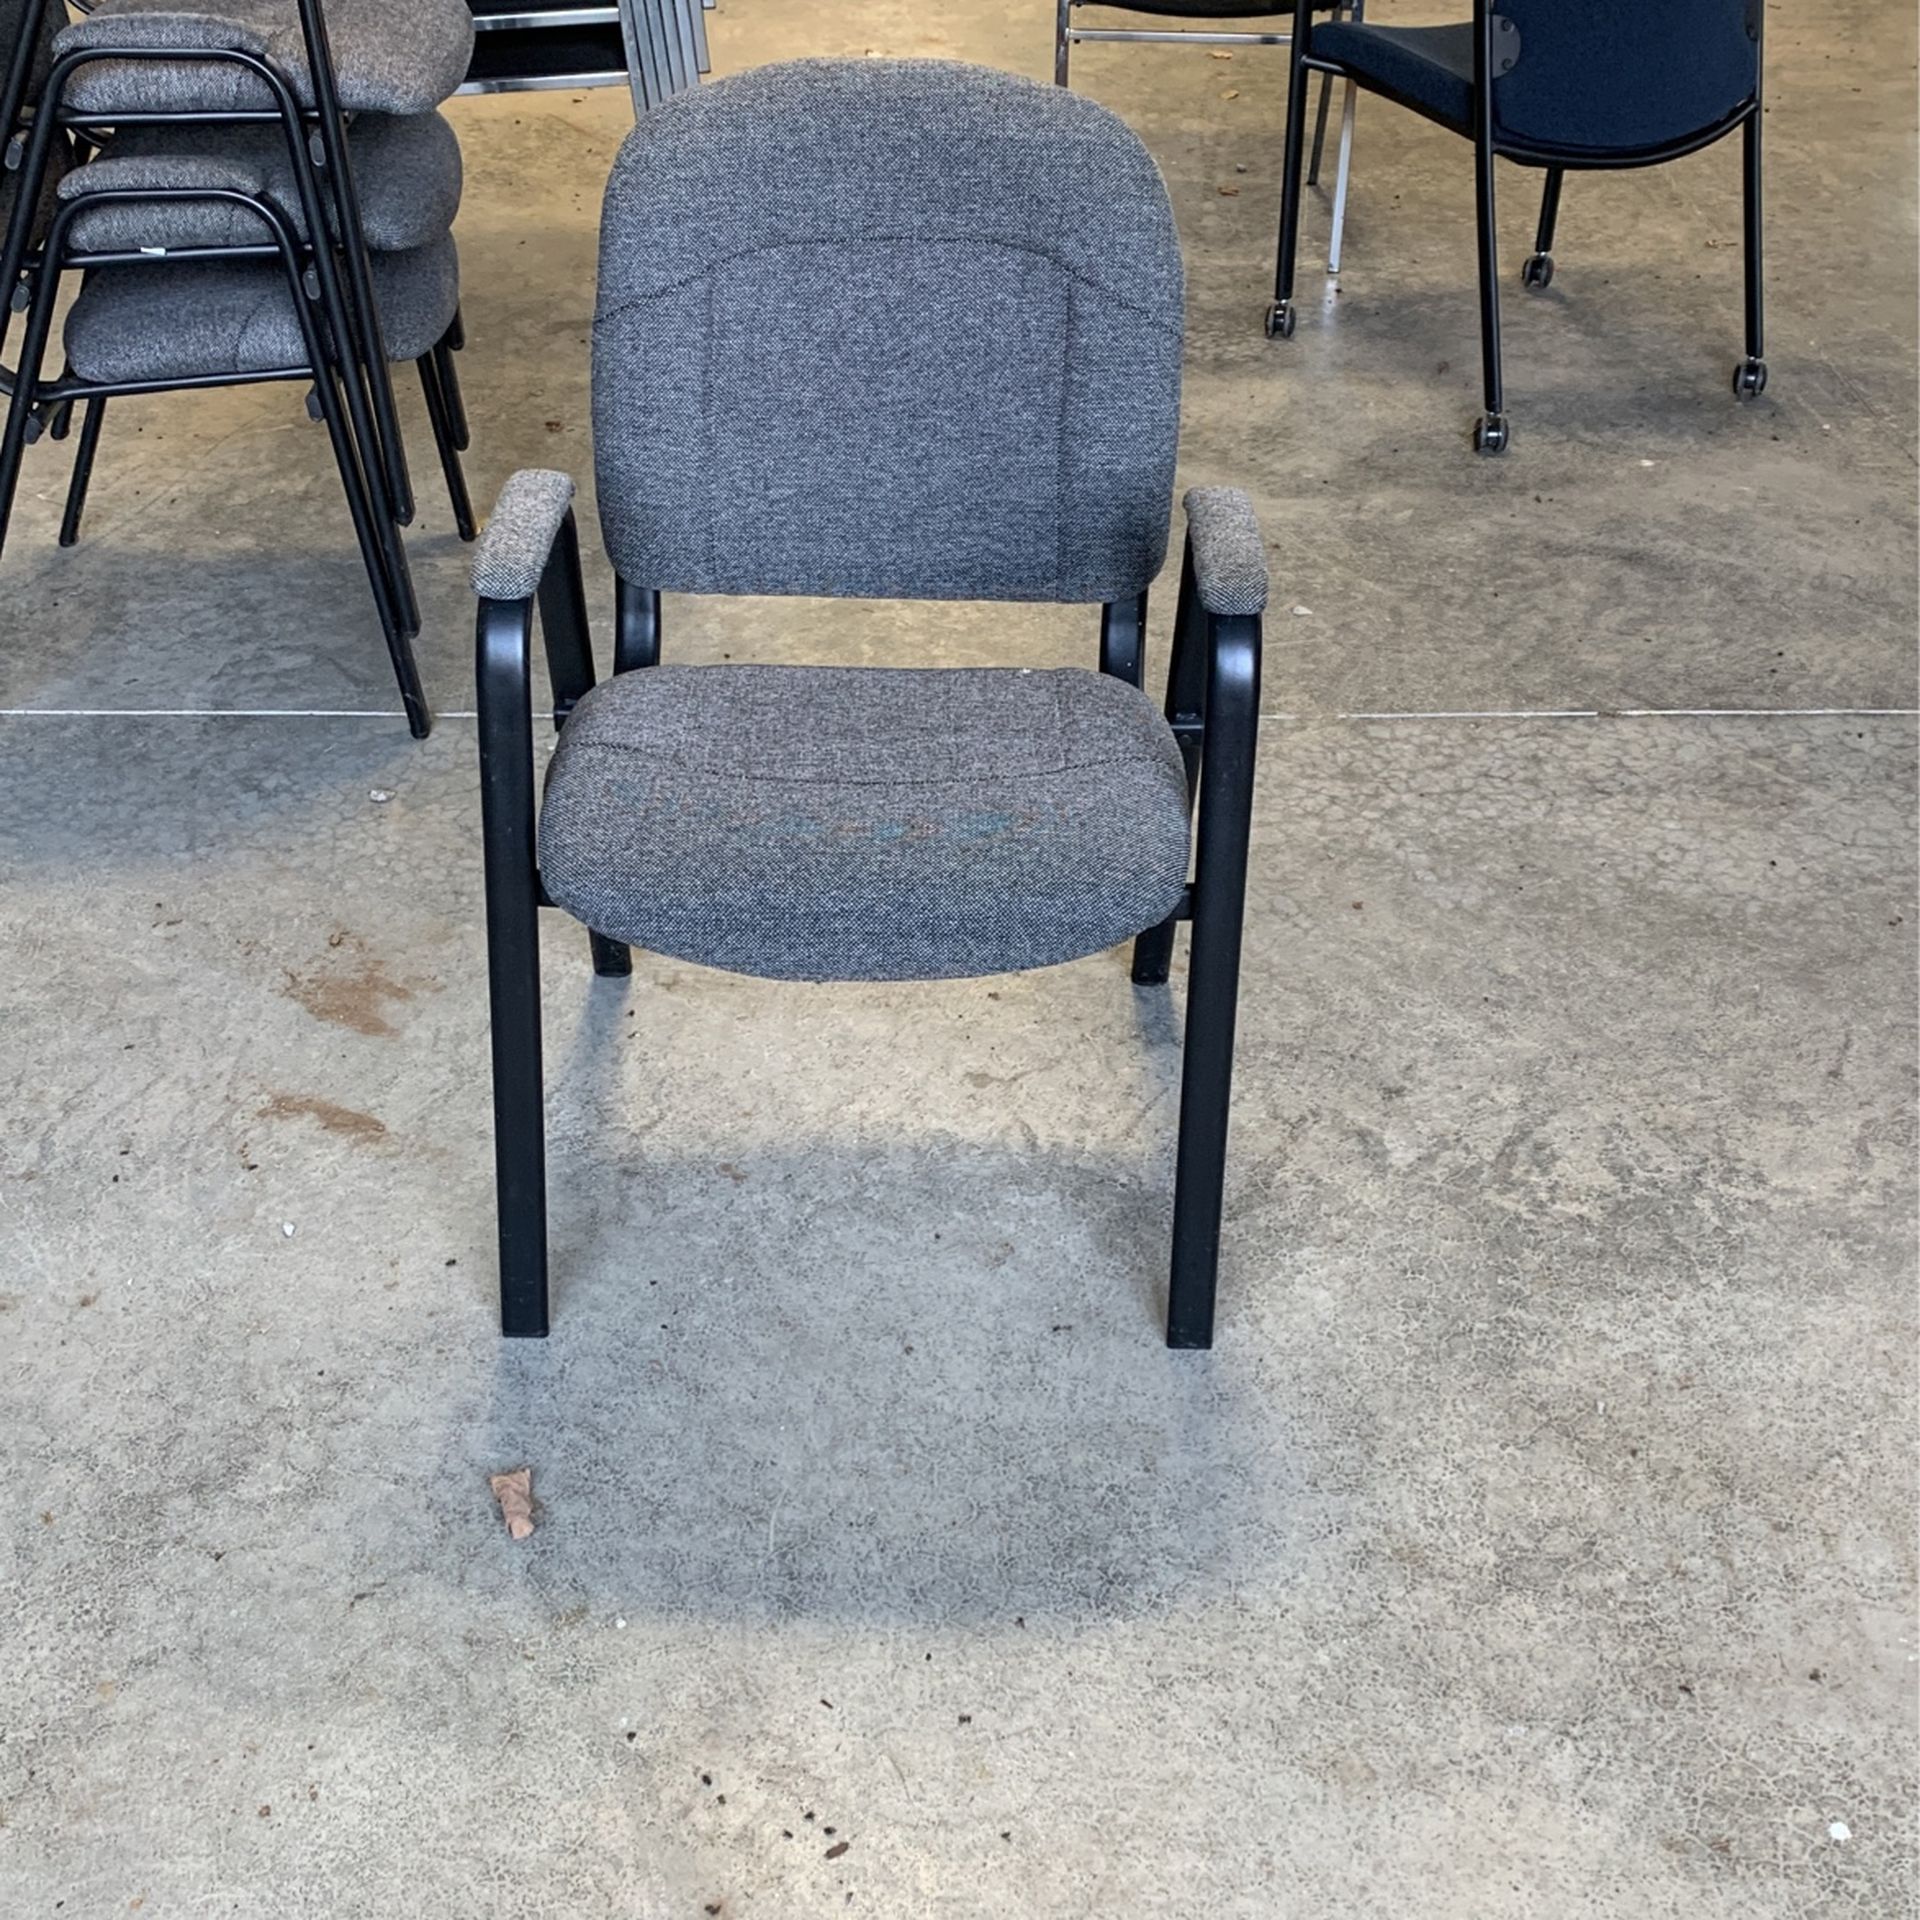 Stackable Office Chairs